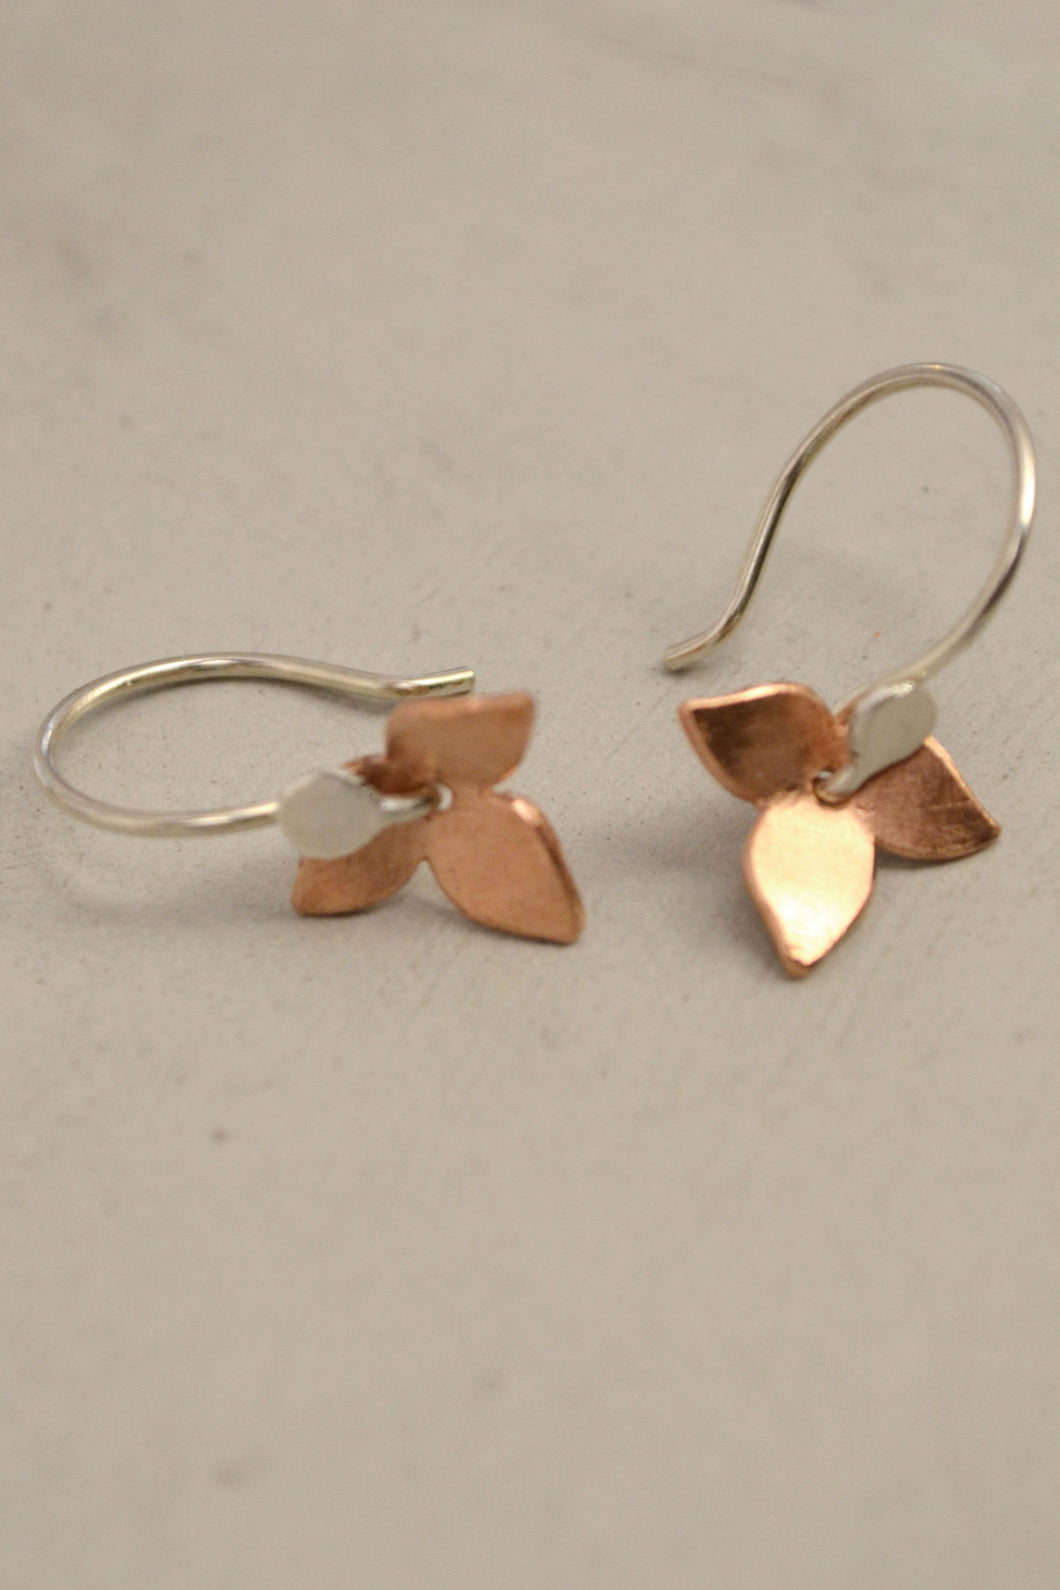 Floral Earrings Copper and Silver by Carolina Lutz S